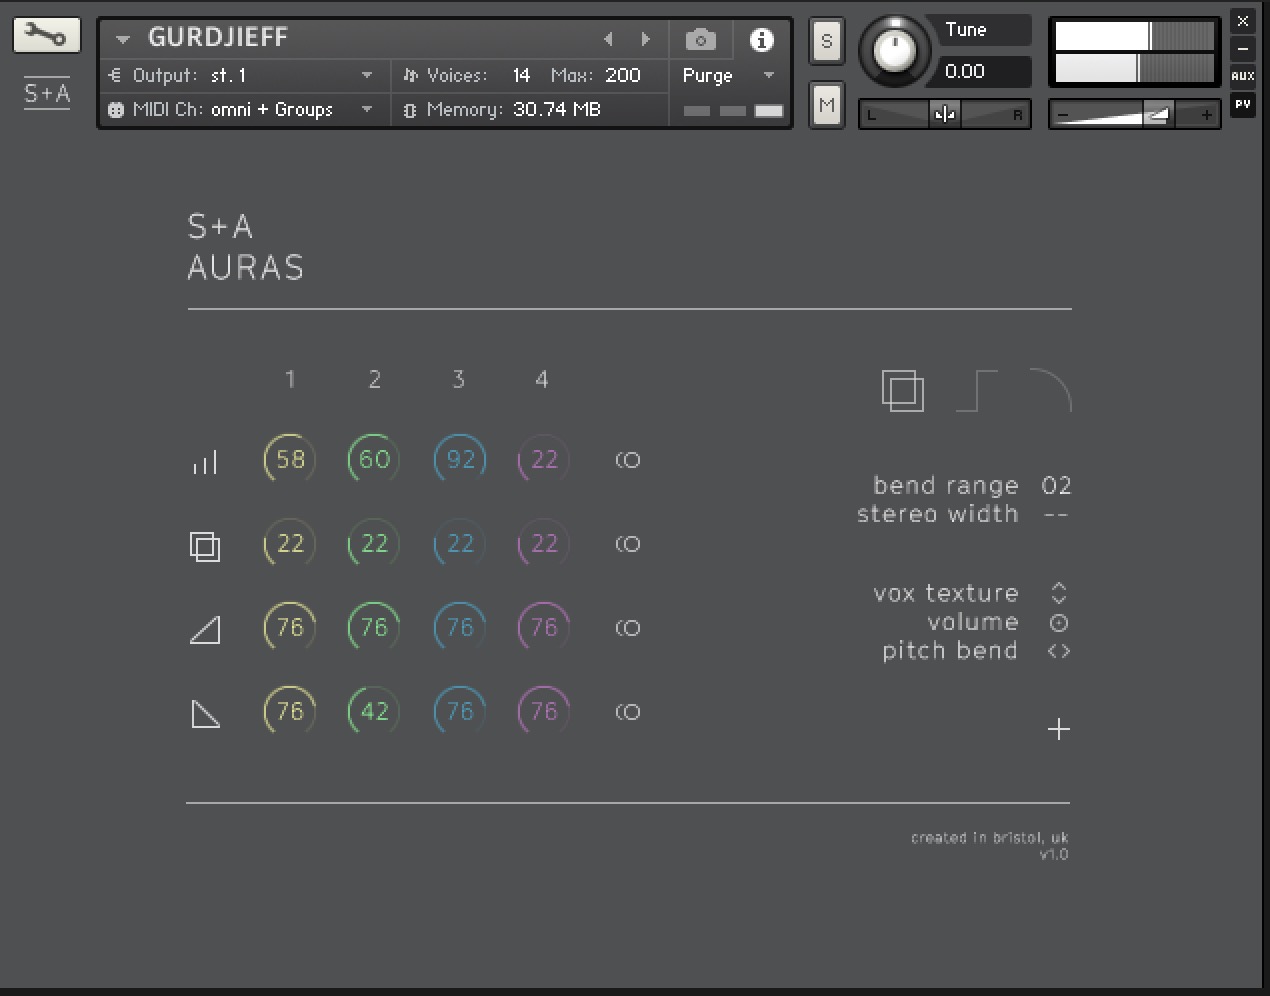 AURAS a Kontakt library with ROLI Seaboard support by SLATE + ASH Review